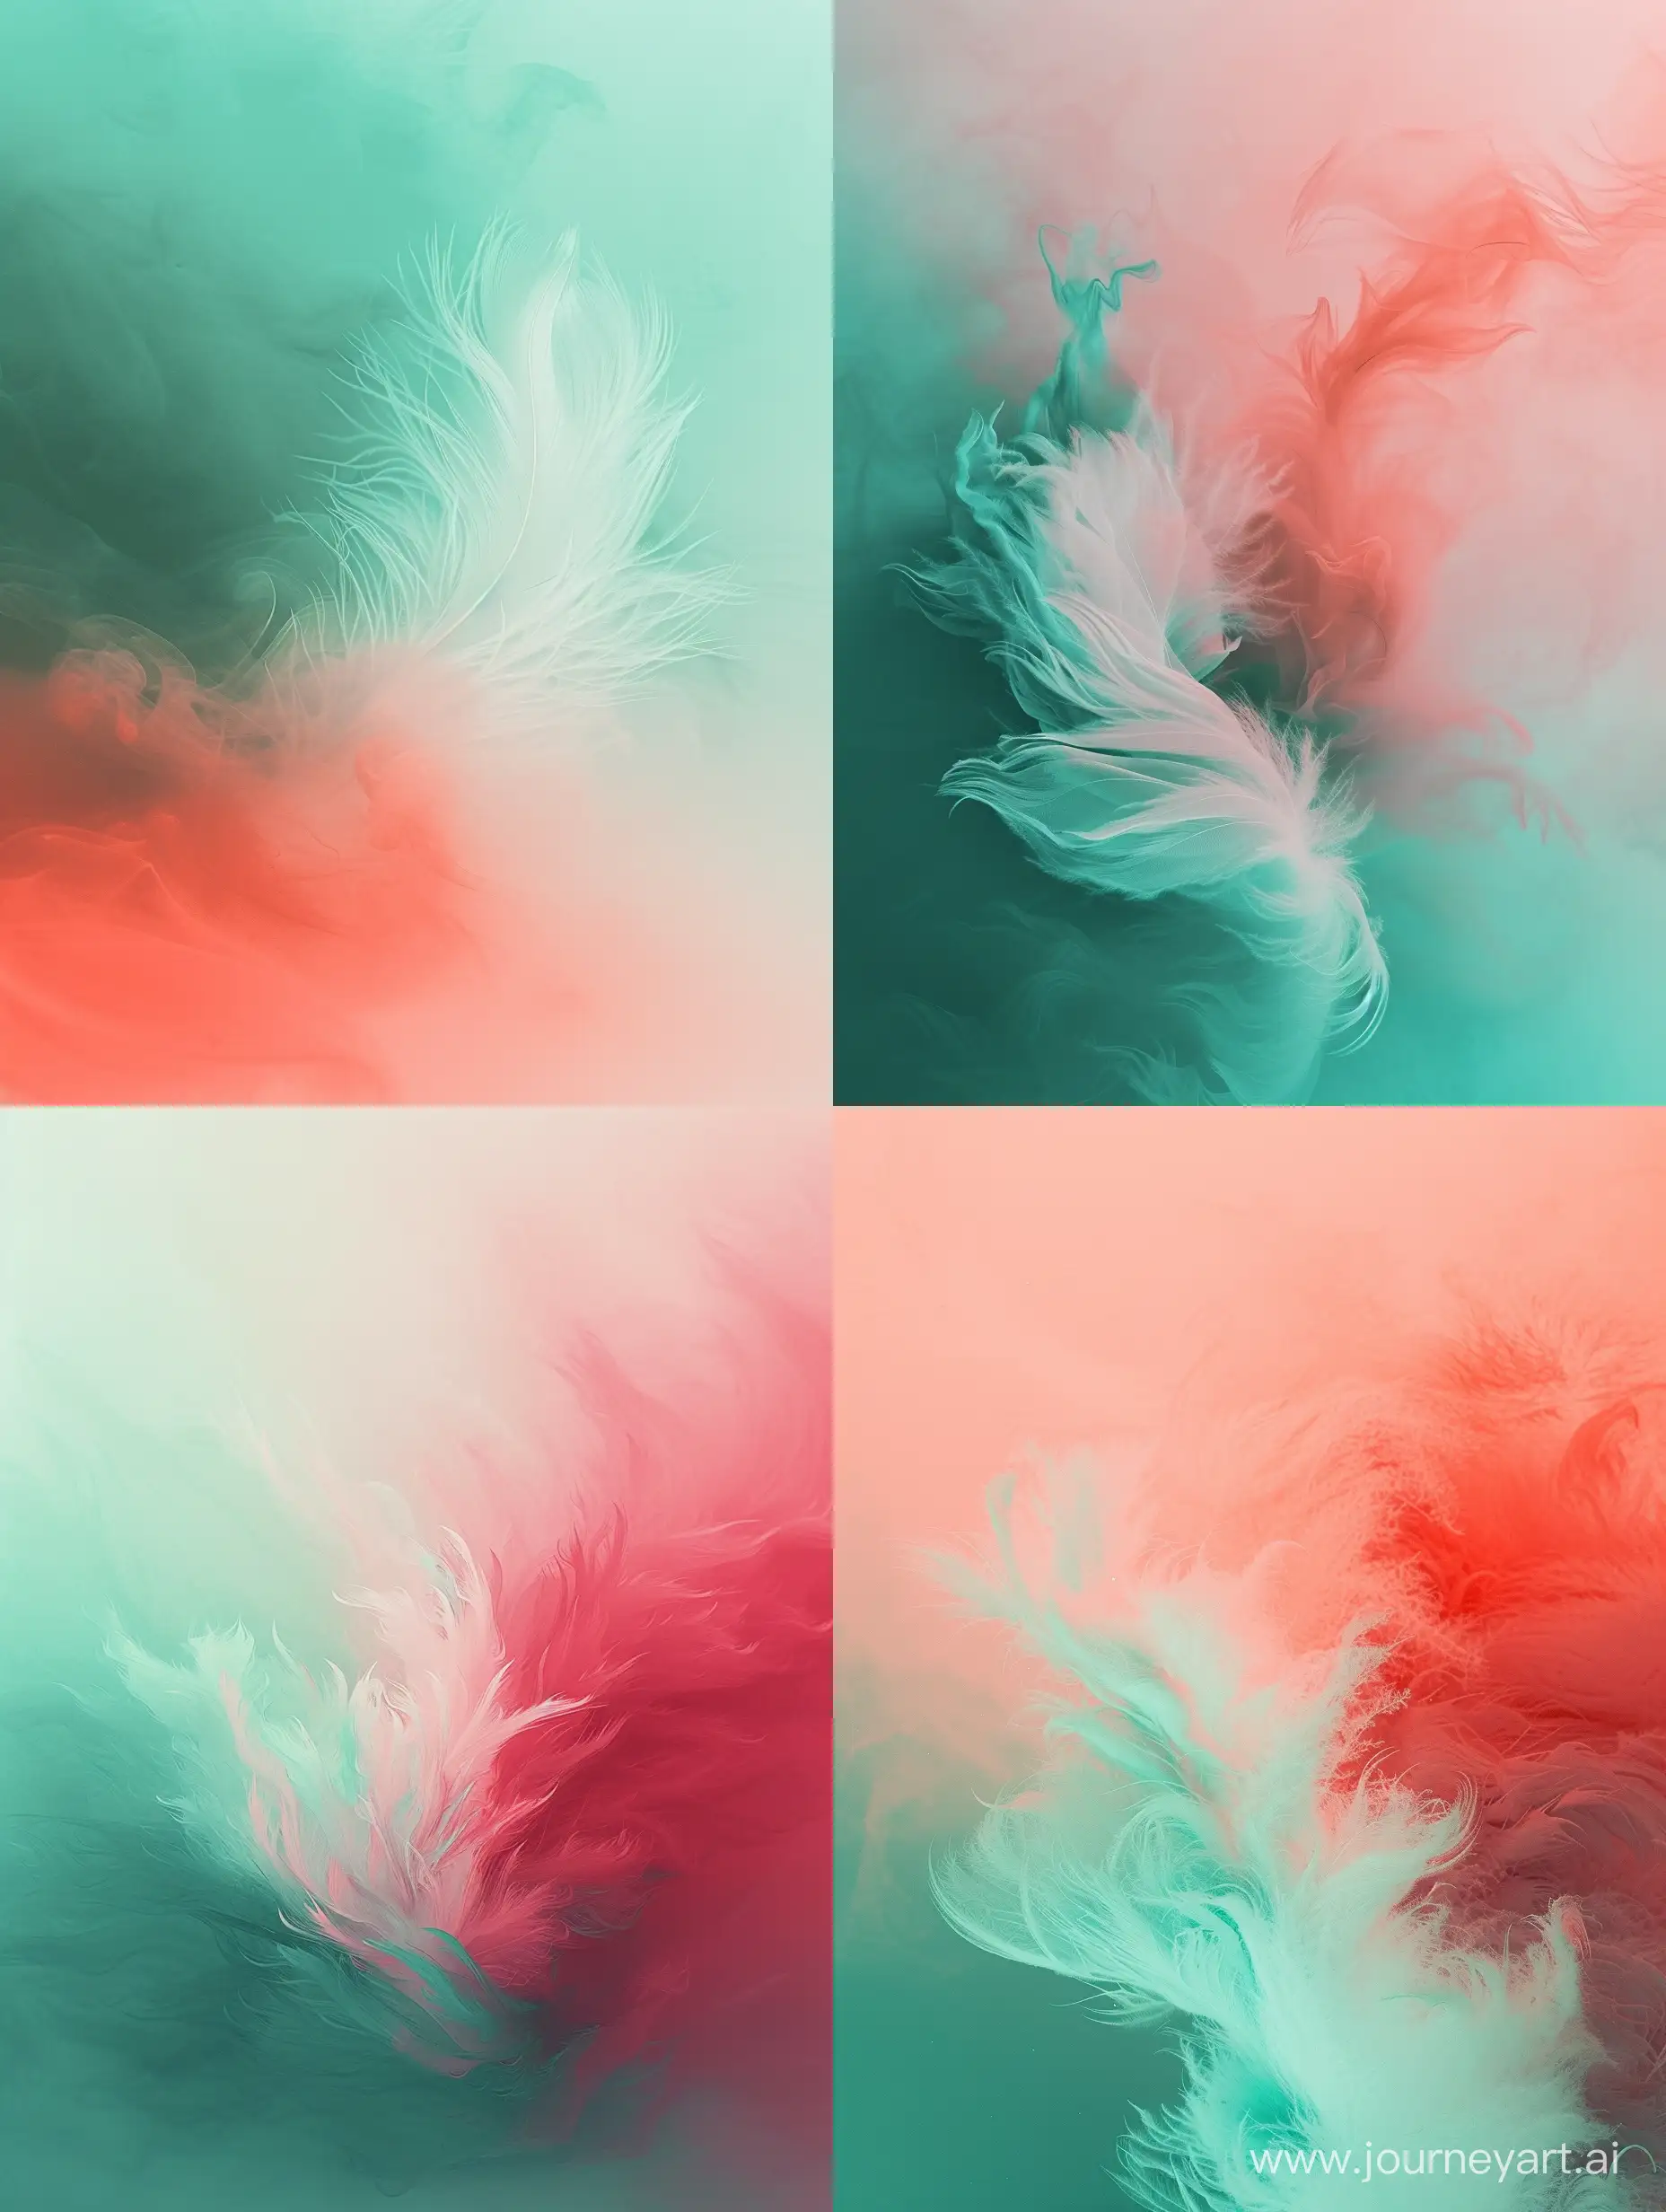 Ethereal-Cotton-Candy-Dreams-Minimalist-Painting-in-Pink-White-and-Turquoise